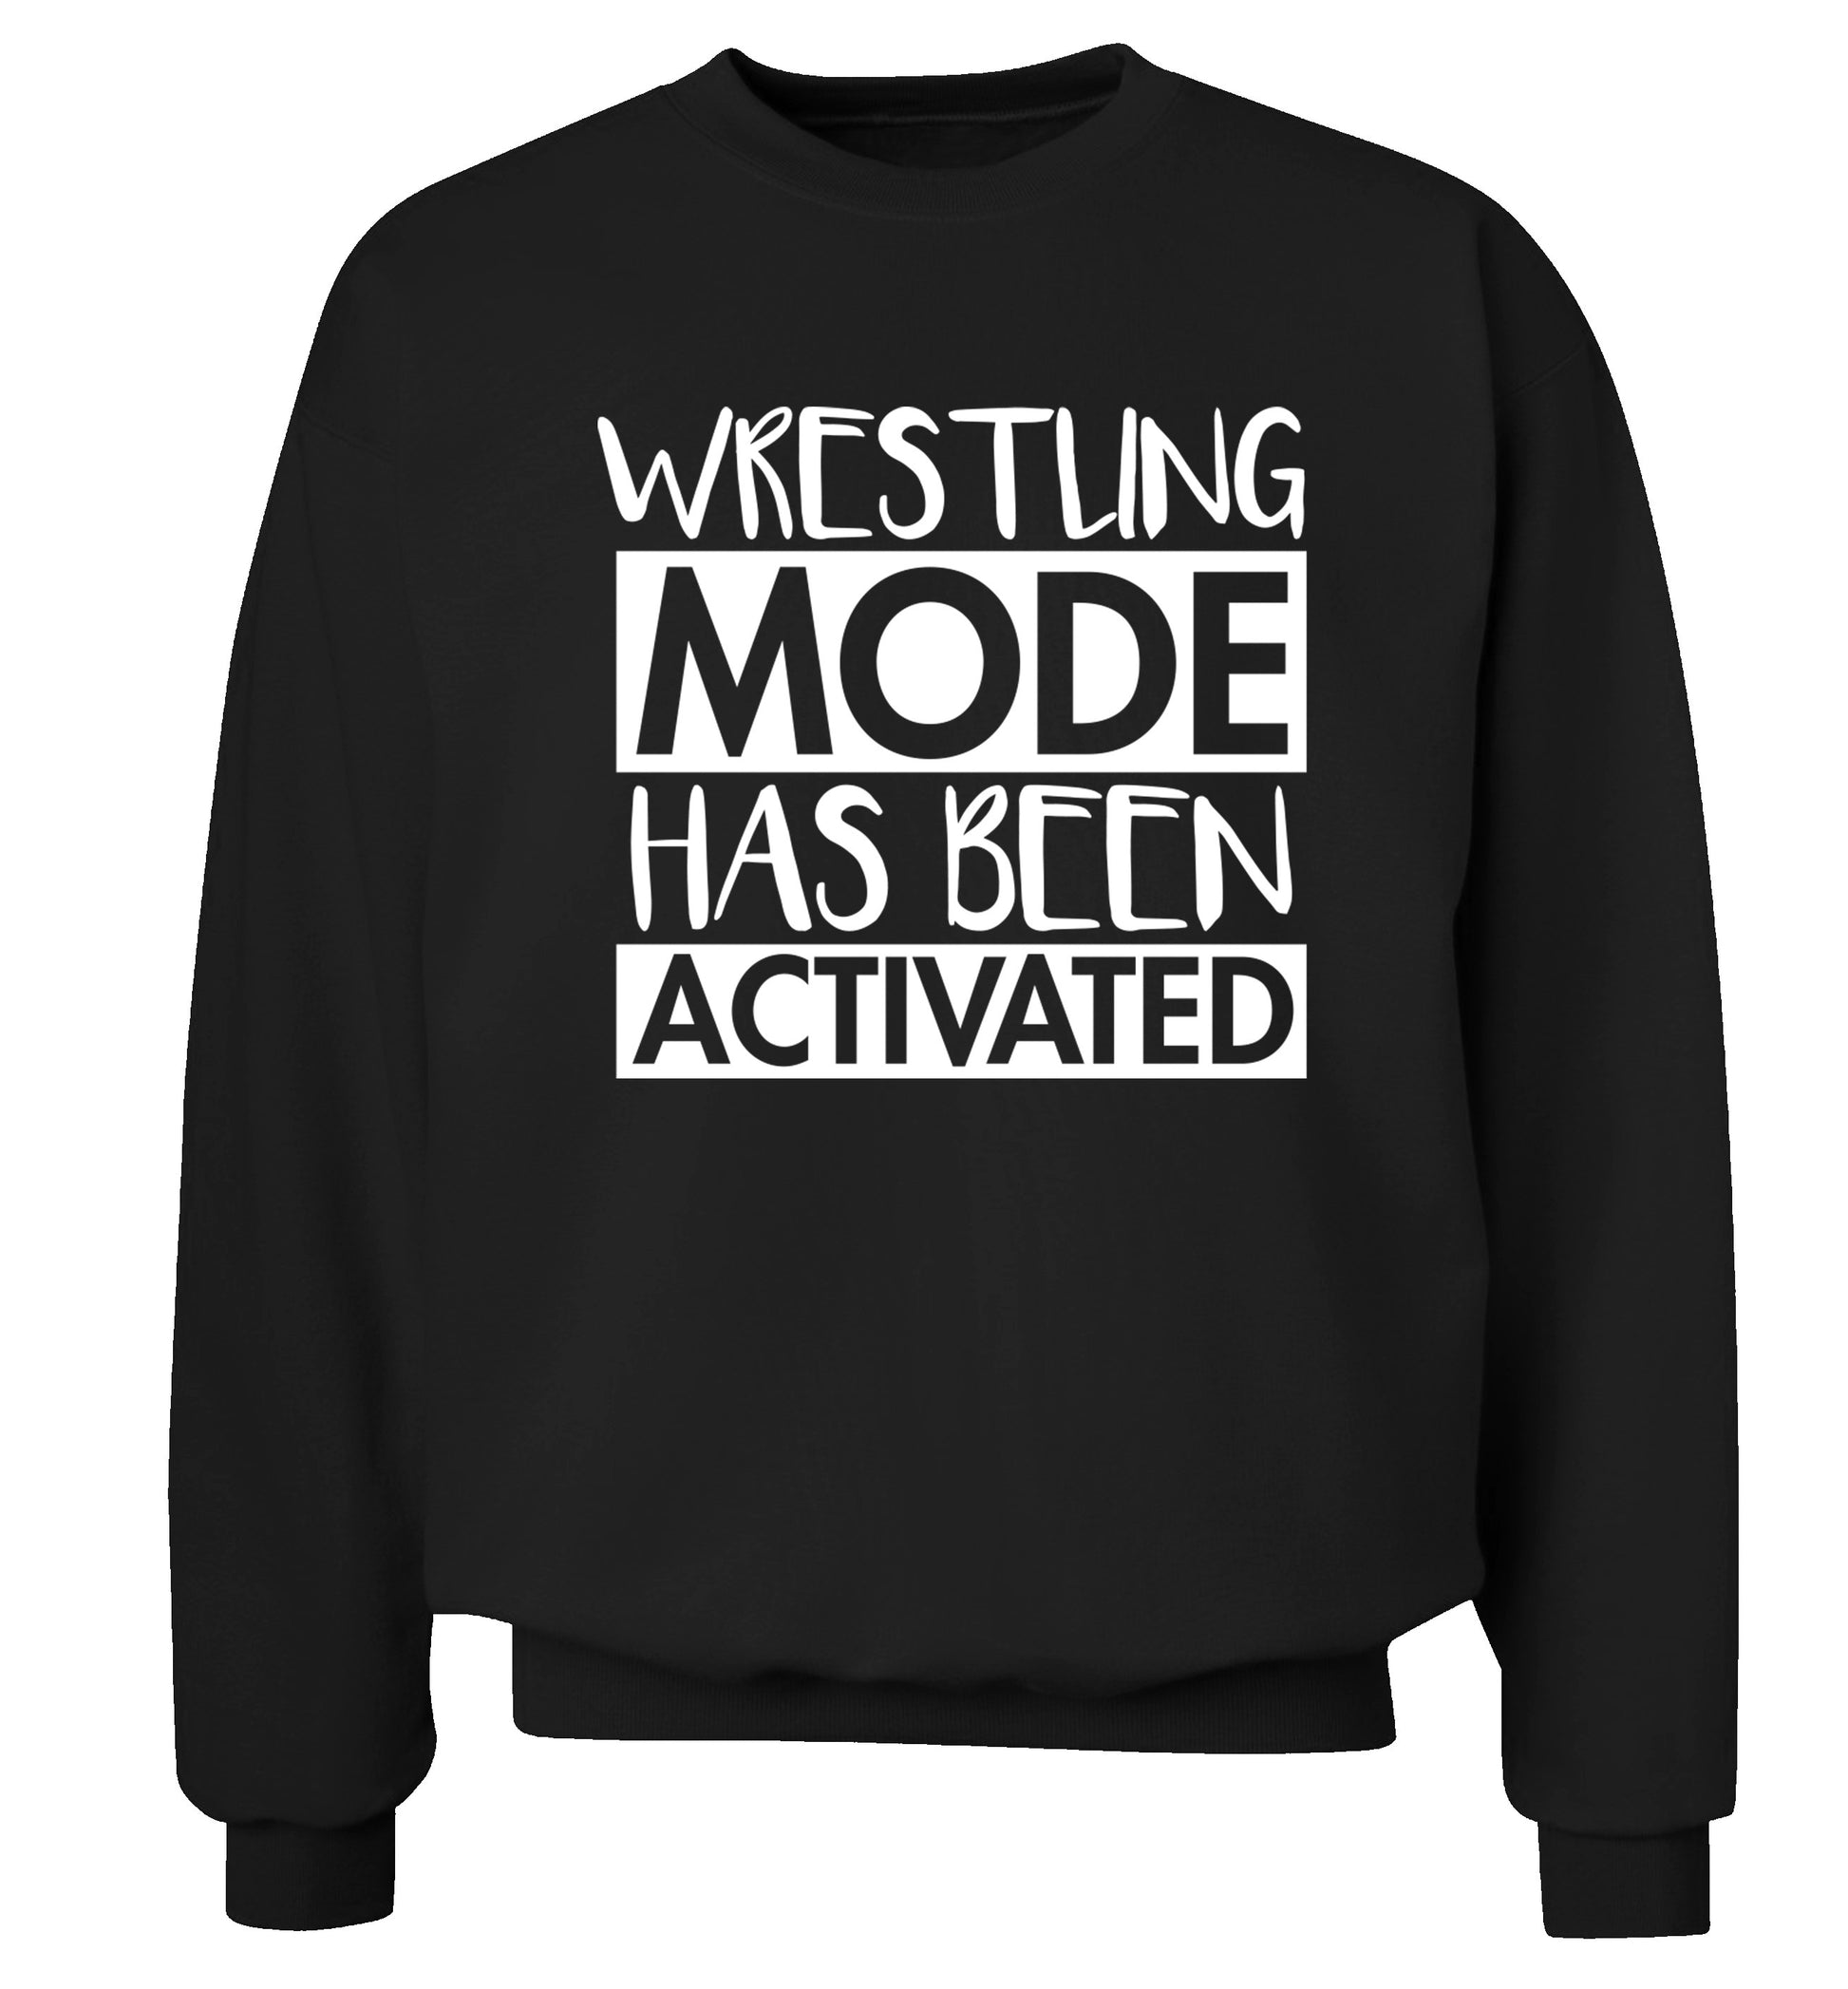 Wresting mode activated Adult's unisex black Sweater 2XL